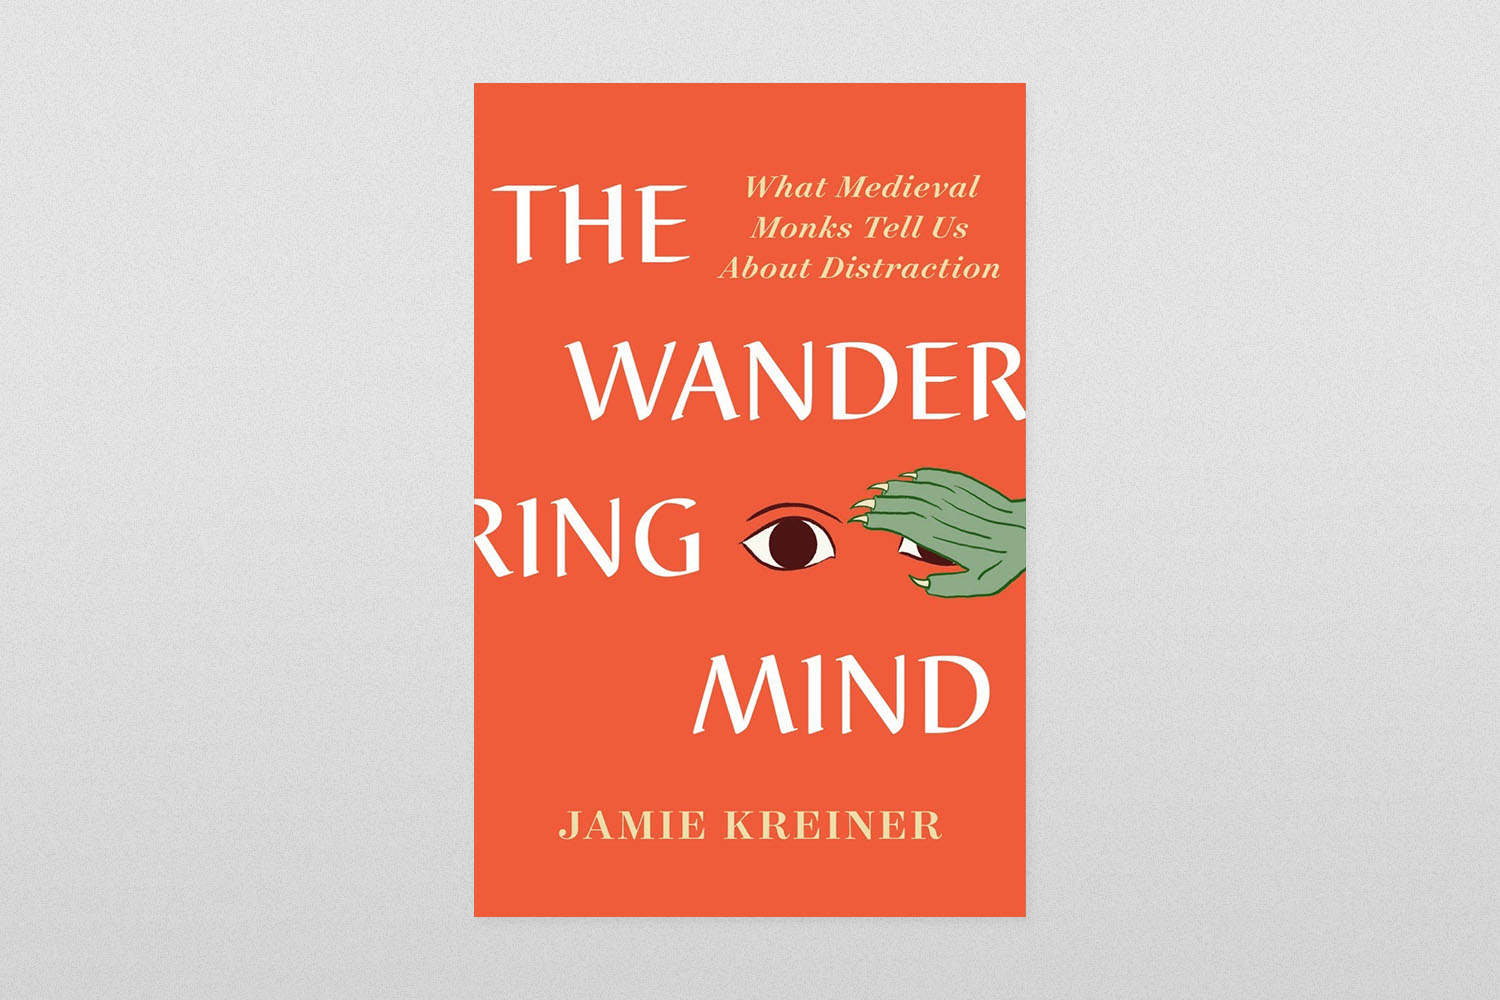 The Wandering Mind- What Medieval Monks Tell Us about Distraction, Jamie Kreiner